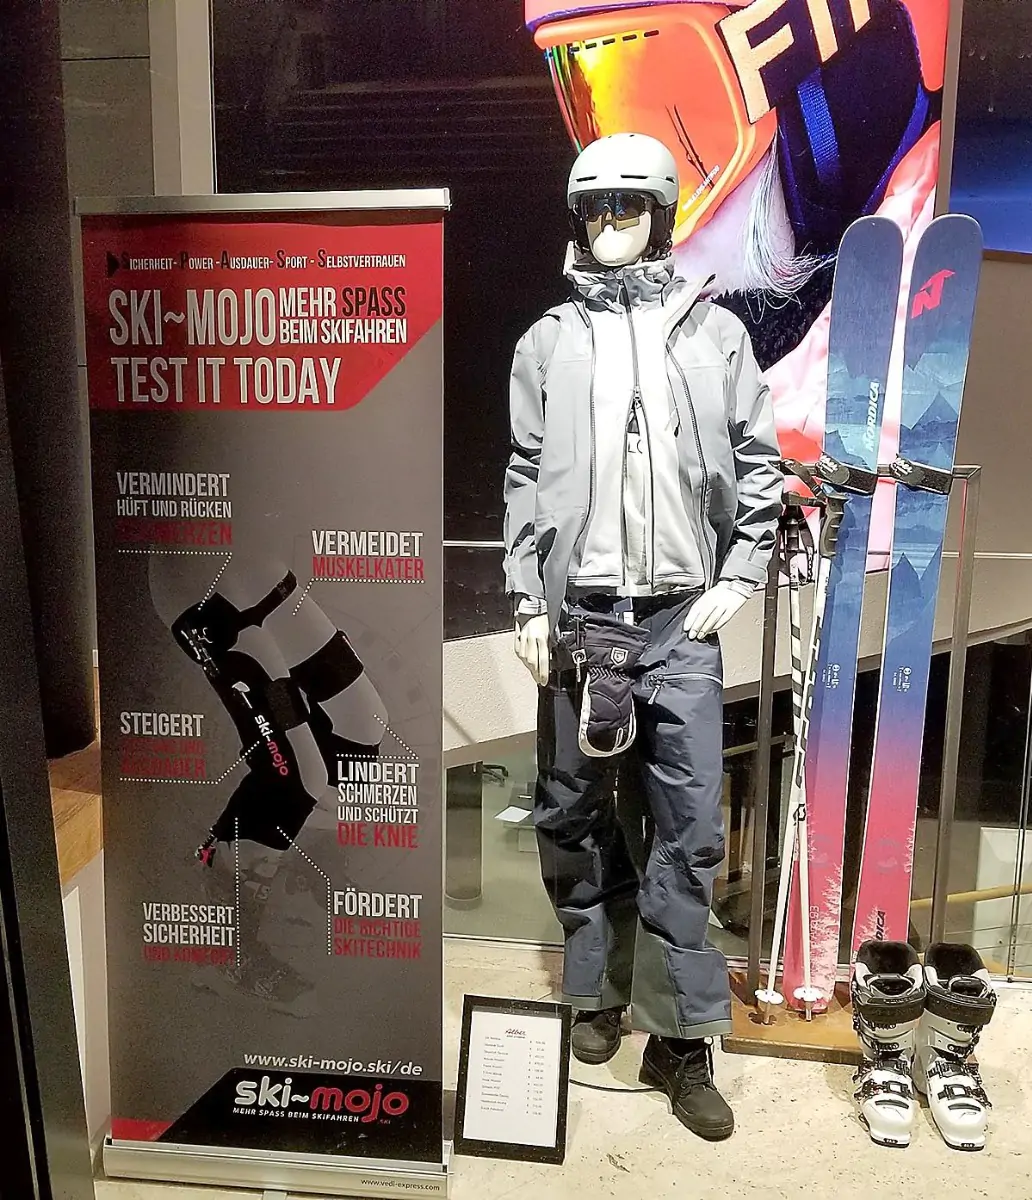 Roll-up banner stand in a window display with a mannequin dressed as a skier